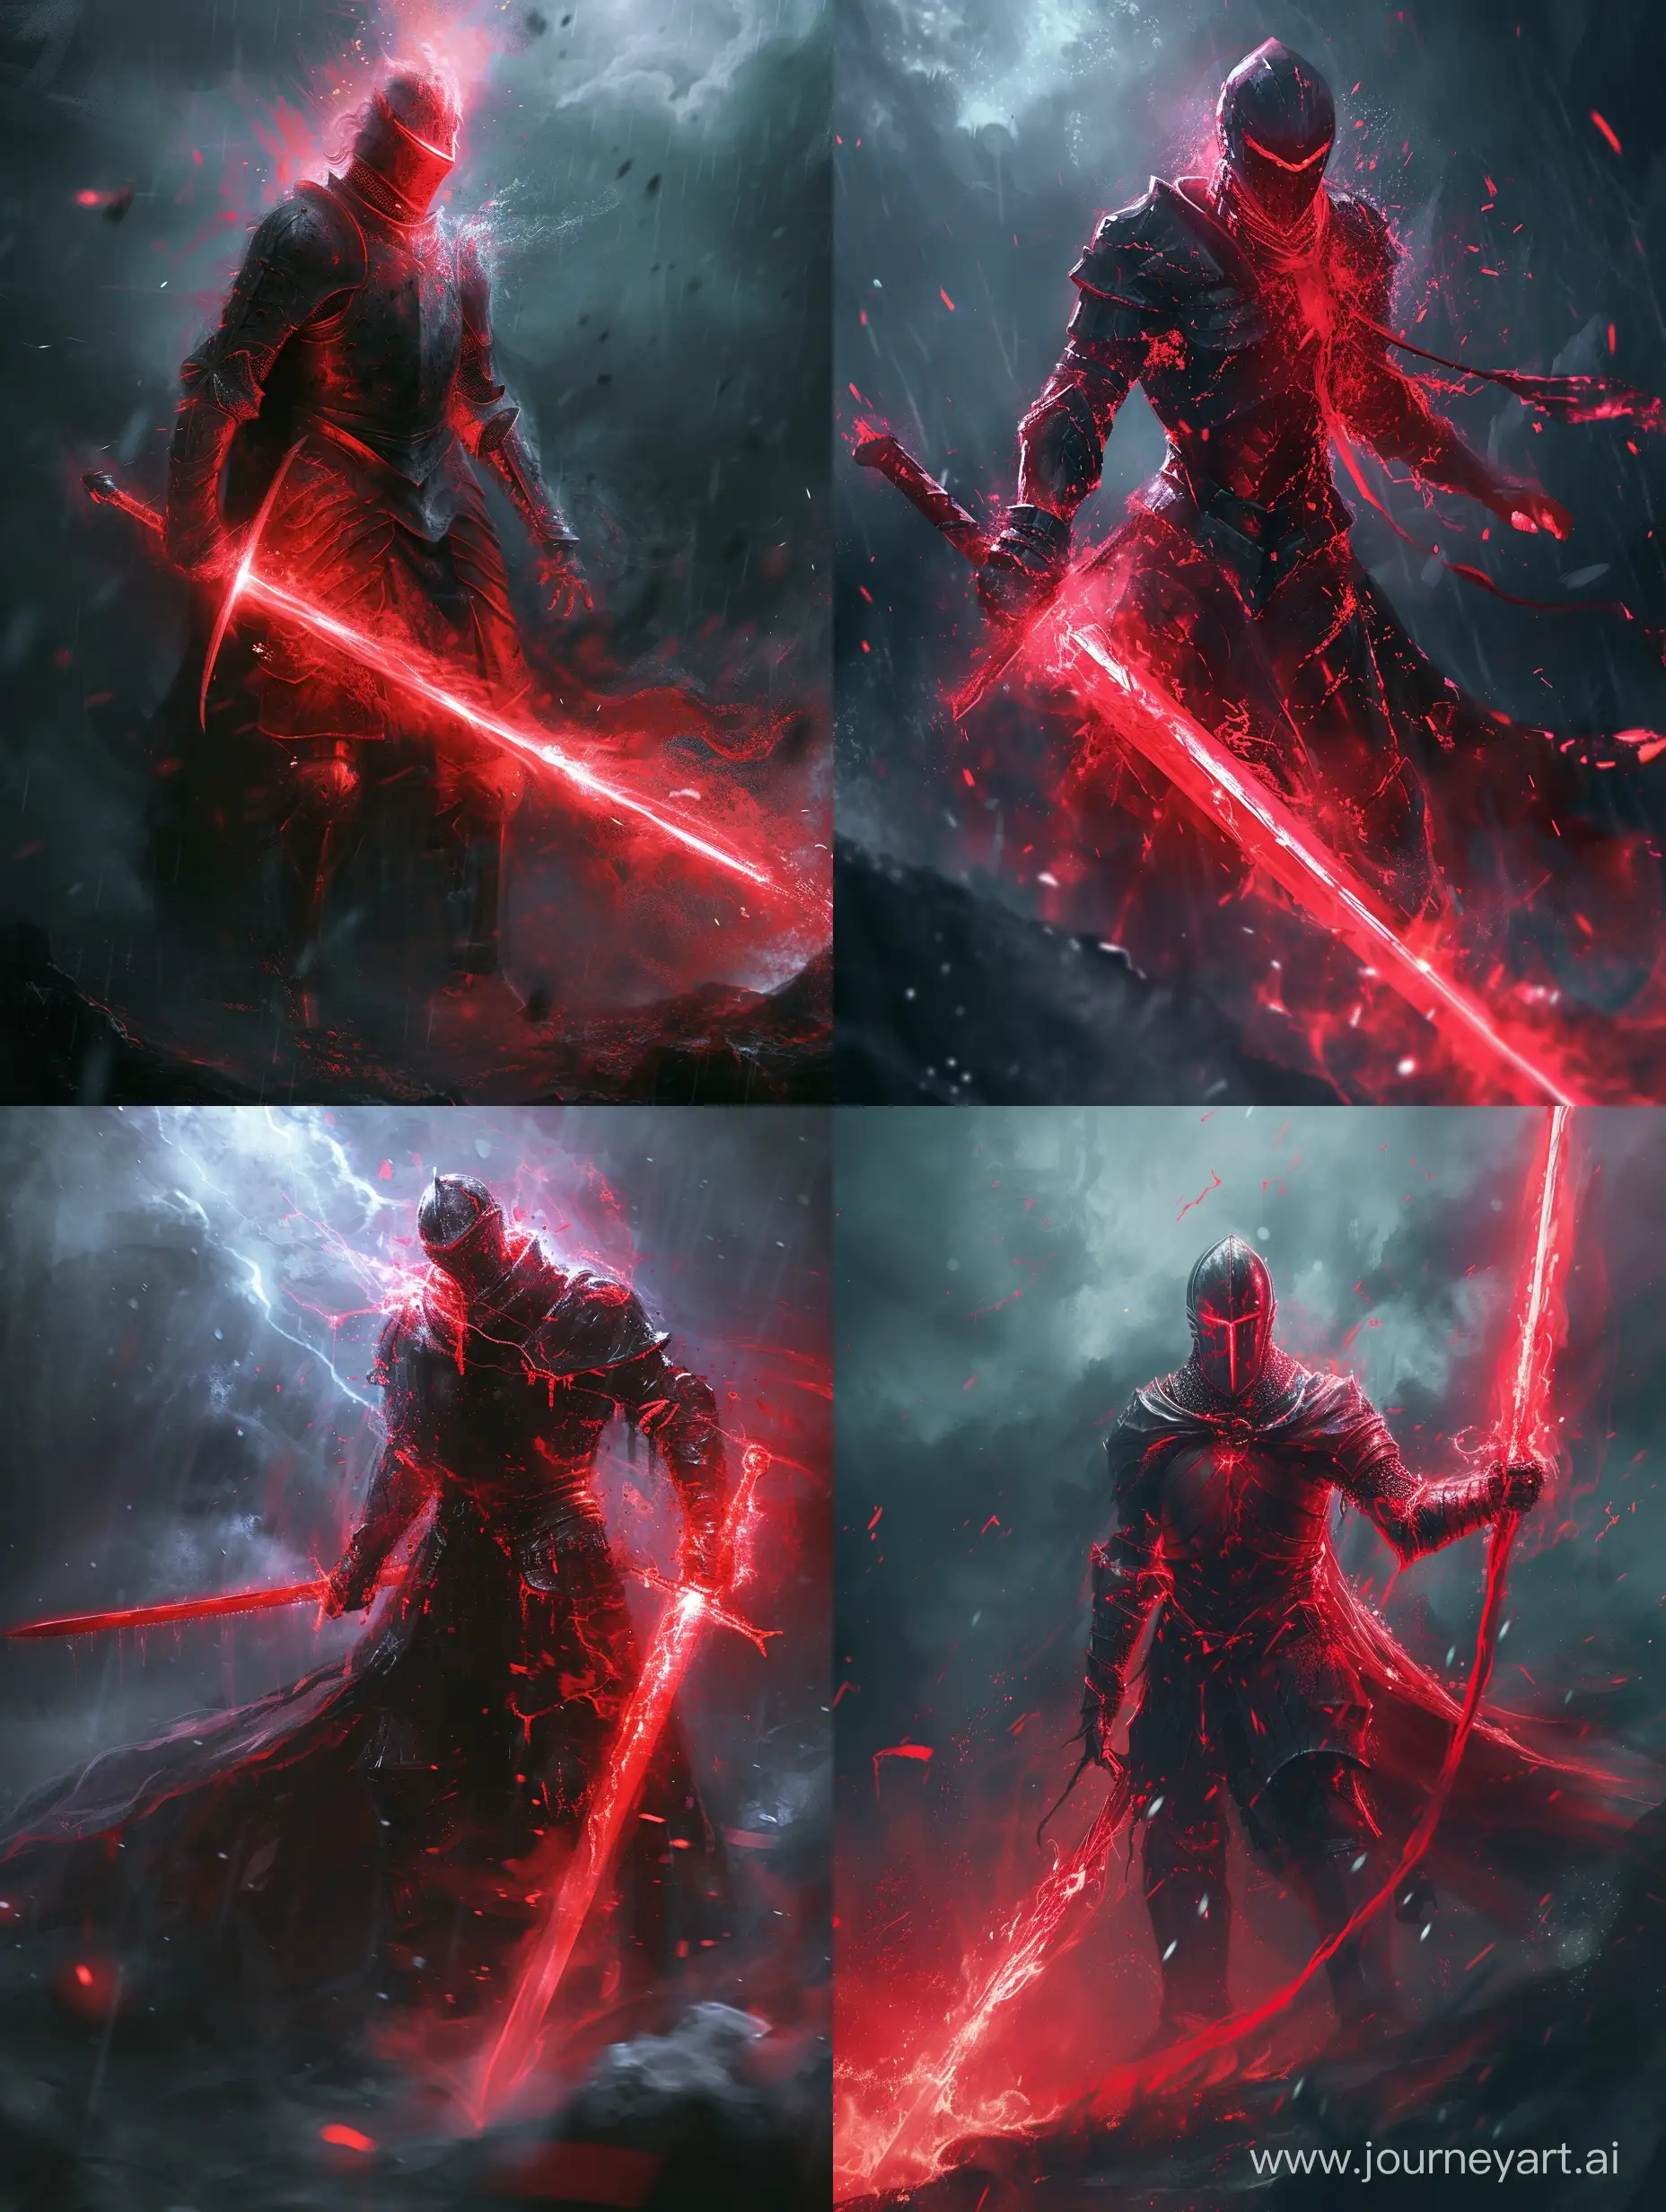 image of a glowing red knight emitting a crimson aura, red sword in one hand, dark, stormy background, cinematic quality